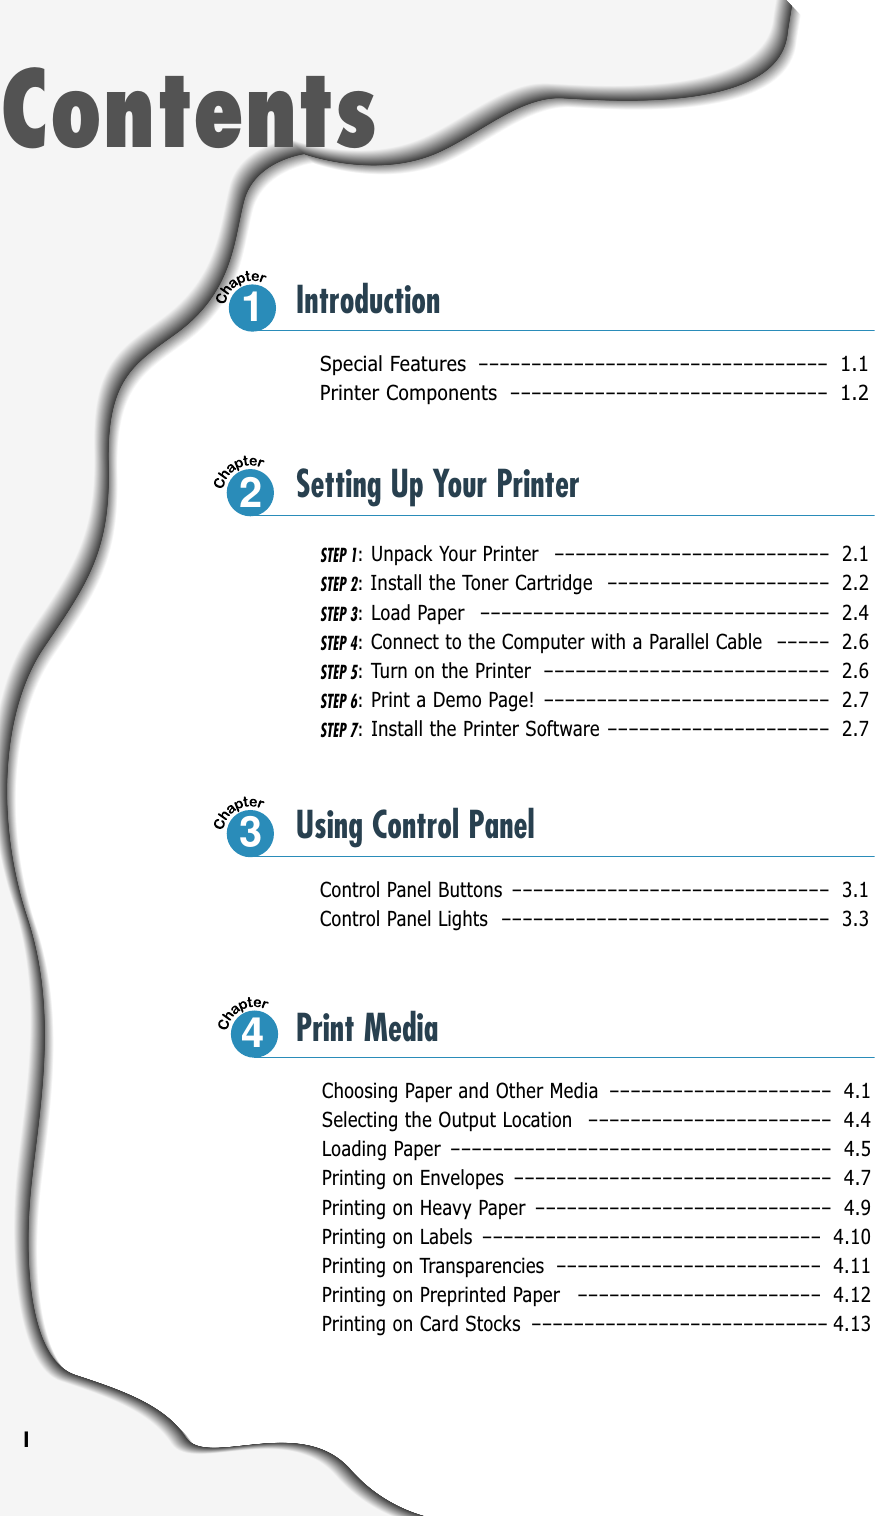 ISpecial Features –––––––––––––––––––––––––––––––––1.1Printer Components ––––––––––––––––––––––––––––––1.2Control Panel Buttons –––––––––––––––––––––––––––––– 3.1Control Panel Lights ––––––––––––––––––––––––––––––– 3.3ContentsIntroductionSTEP 1:Unpack Your Printer –––––––––––––––––––––––––– 2.1STEP 2:Install the Toner Cartridge ––––––––––––––––––––– 2.2STEP 3:Load Paper ––––––––––––––––––––––––––––––––– 2.4STEP 4:Connect to the Computer with a Parallel Cable ––––– 2.6STEP 5:Turn on the Printer ––––––––––––––––––––––––––– 2.6STEP 6:Print a Demo Page! ––––––––––––––––––––––––––– 2.7STEP 7:Install the Printer Software ––––––––––––––––––––– 2.7Choosing Paper and Other Media ––––––––––––––––––––– 4.1Selecting the Output Location ––––––––––––––––––––––– 4.4Loading Paper –––––––––––––––––––––––––––––––––––– 4.5Printing on Envelopes –––––––––––––––––––––––––––––– 4.7Printing on Heavy Paper –––––––––––––––––––––––––––– 4.9Printing on Labels –––––––––––––––––––––––––––––––– 4.10Printing on Transparencies ––––––––––––––––––––––––– 4.11Printing on Preprinted Paper ––––––––––––––––––––––– 4.12Printing on Card Stocks –––––––––––––––––––––––––––– 4.1312Setting Up Your Printer3Using Control Panel4Print Media